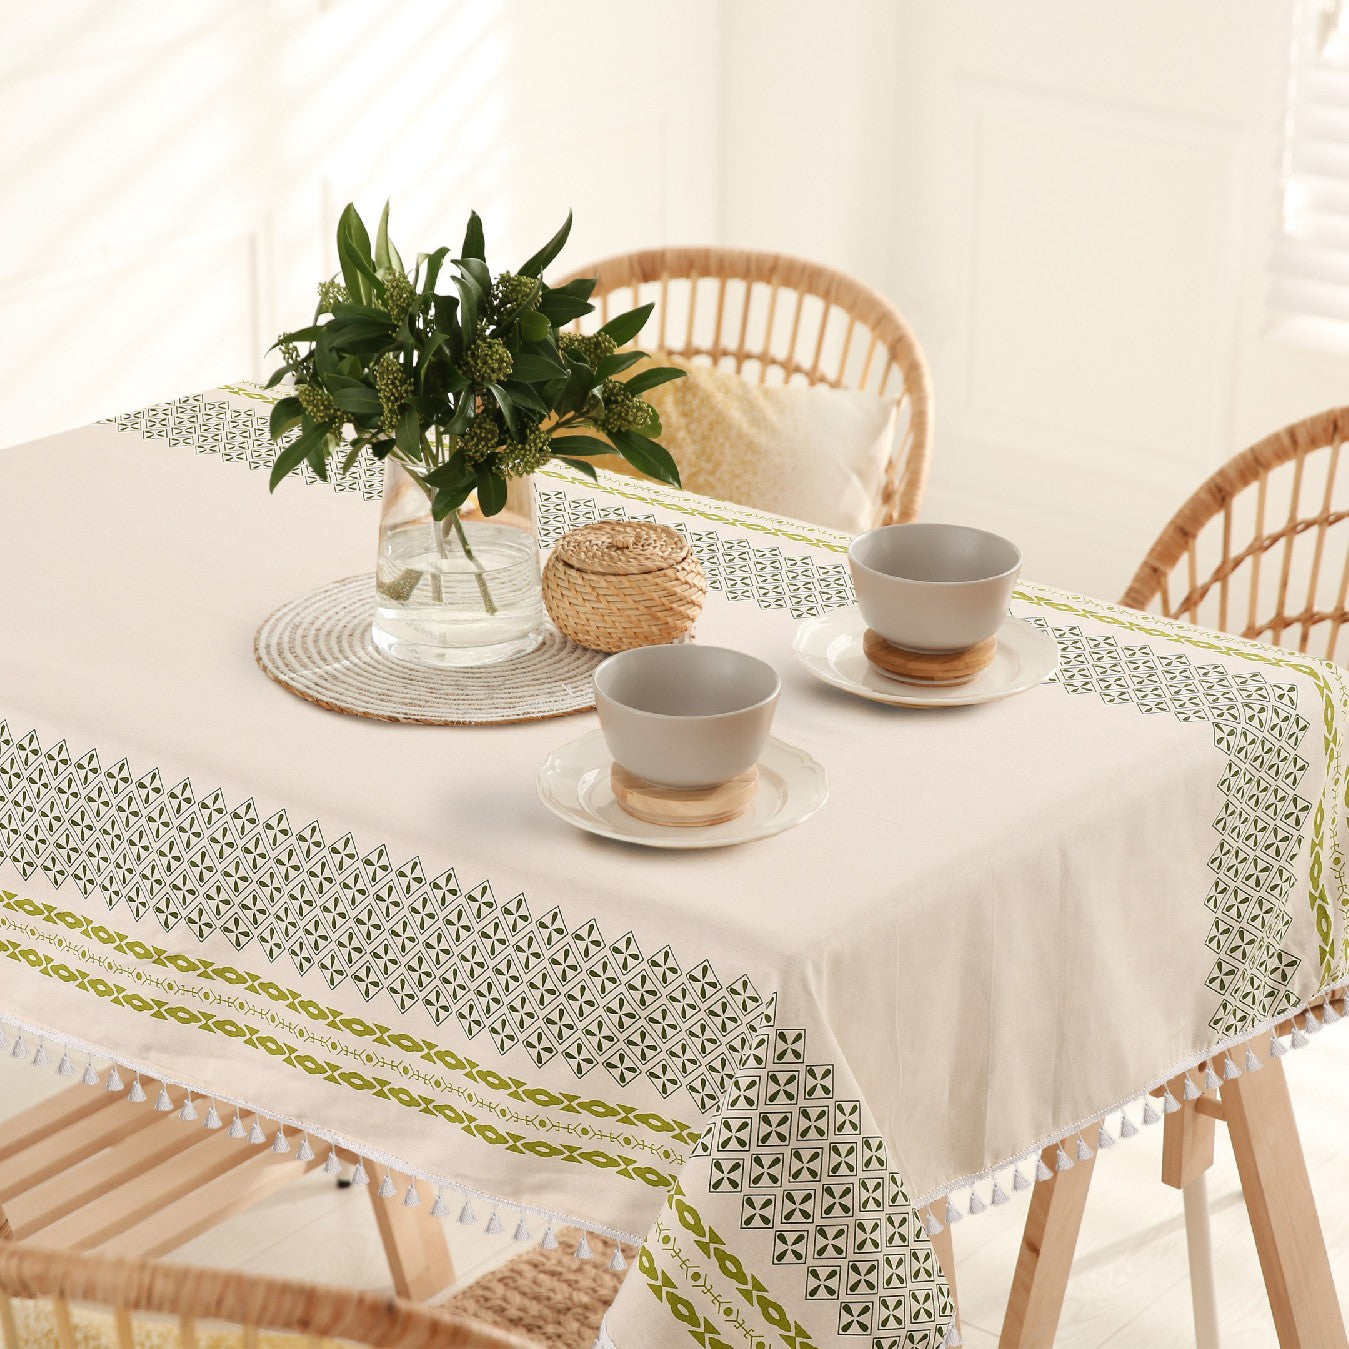 How to use a table runner